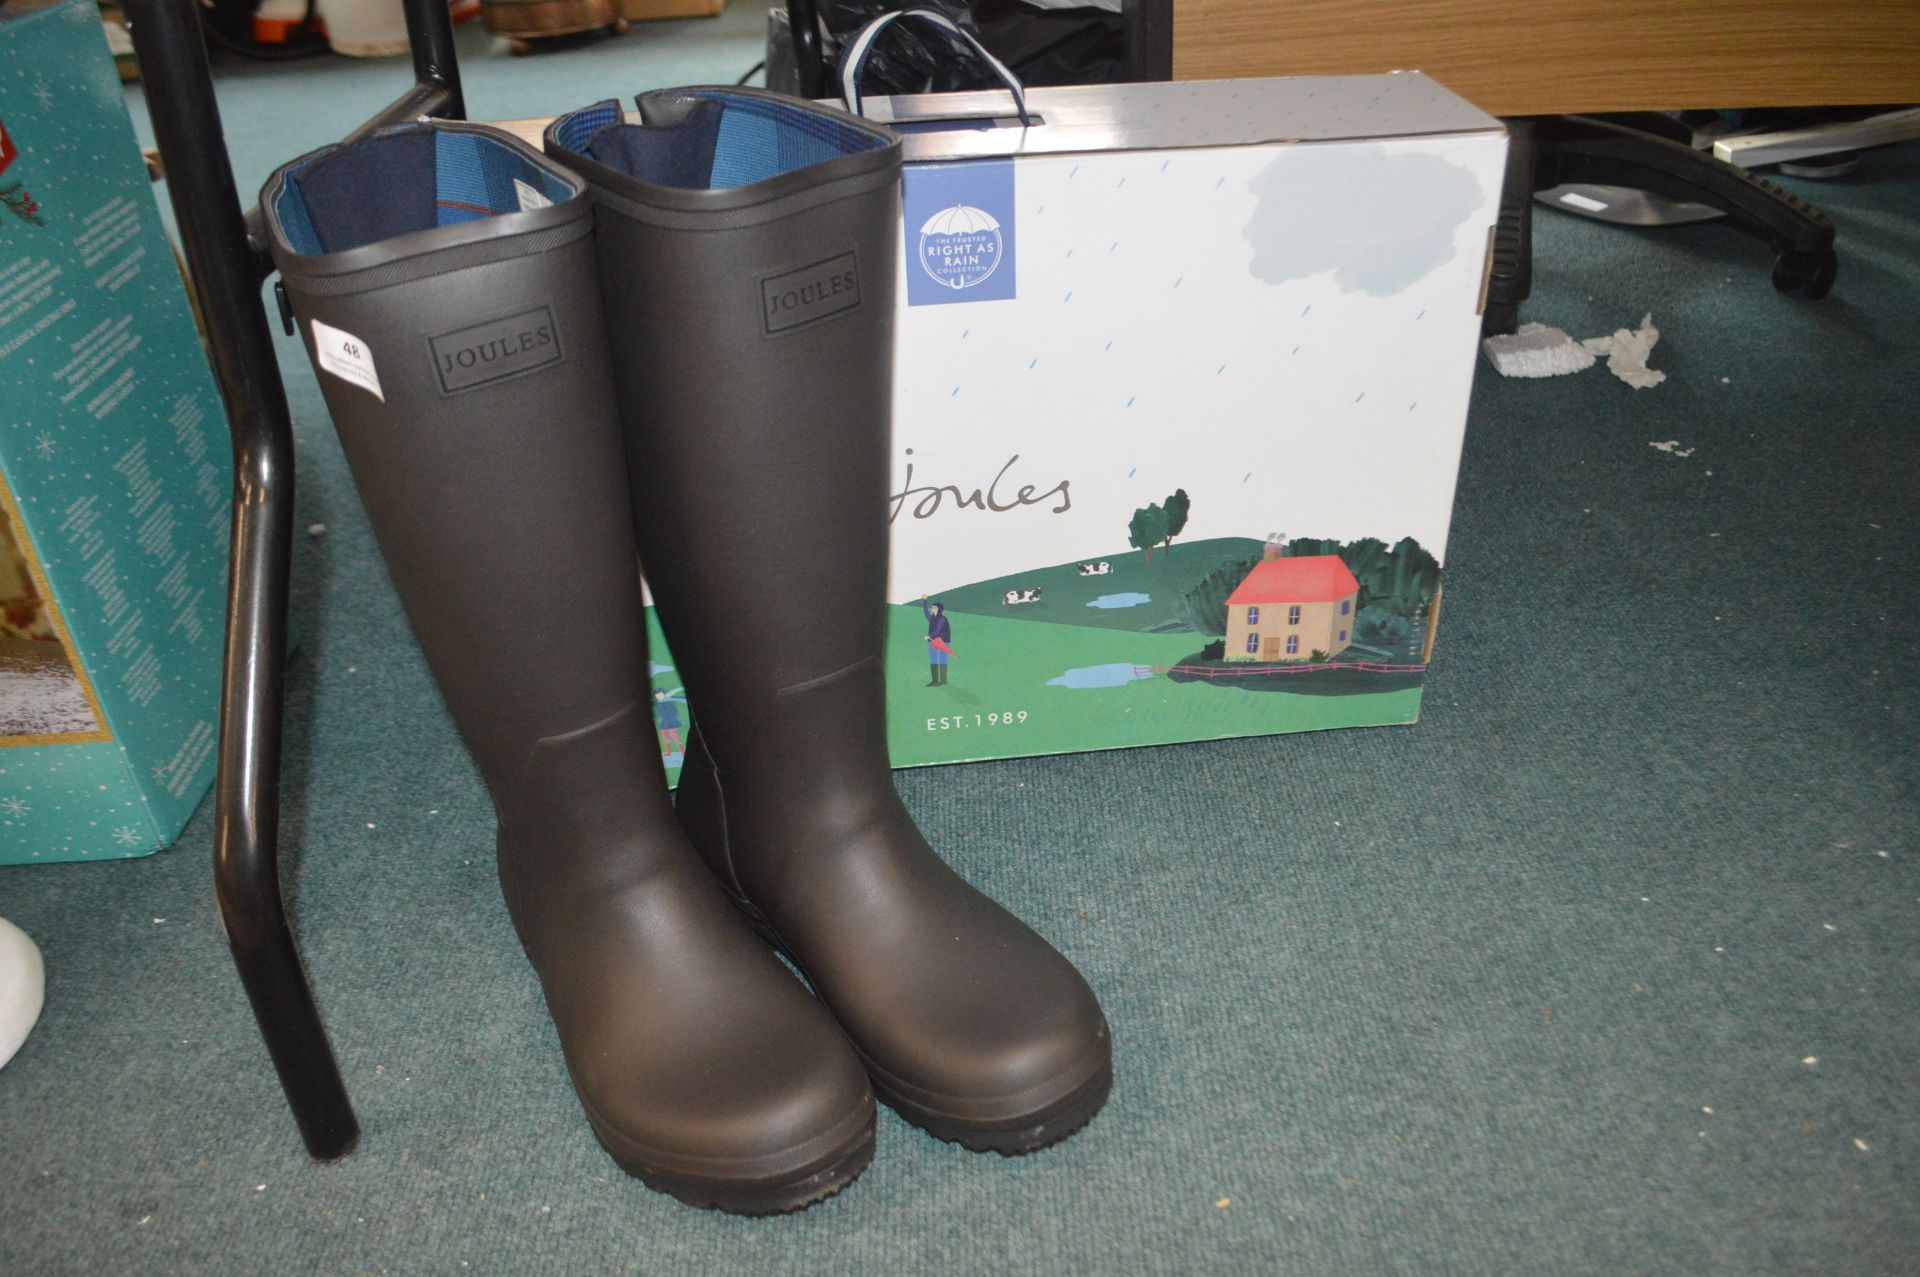 Joules Tall Wellington Boots with Neoprene Lining Size: 11